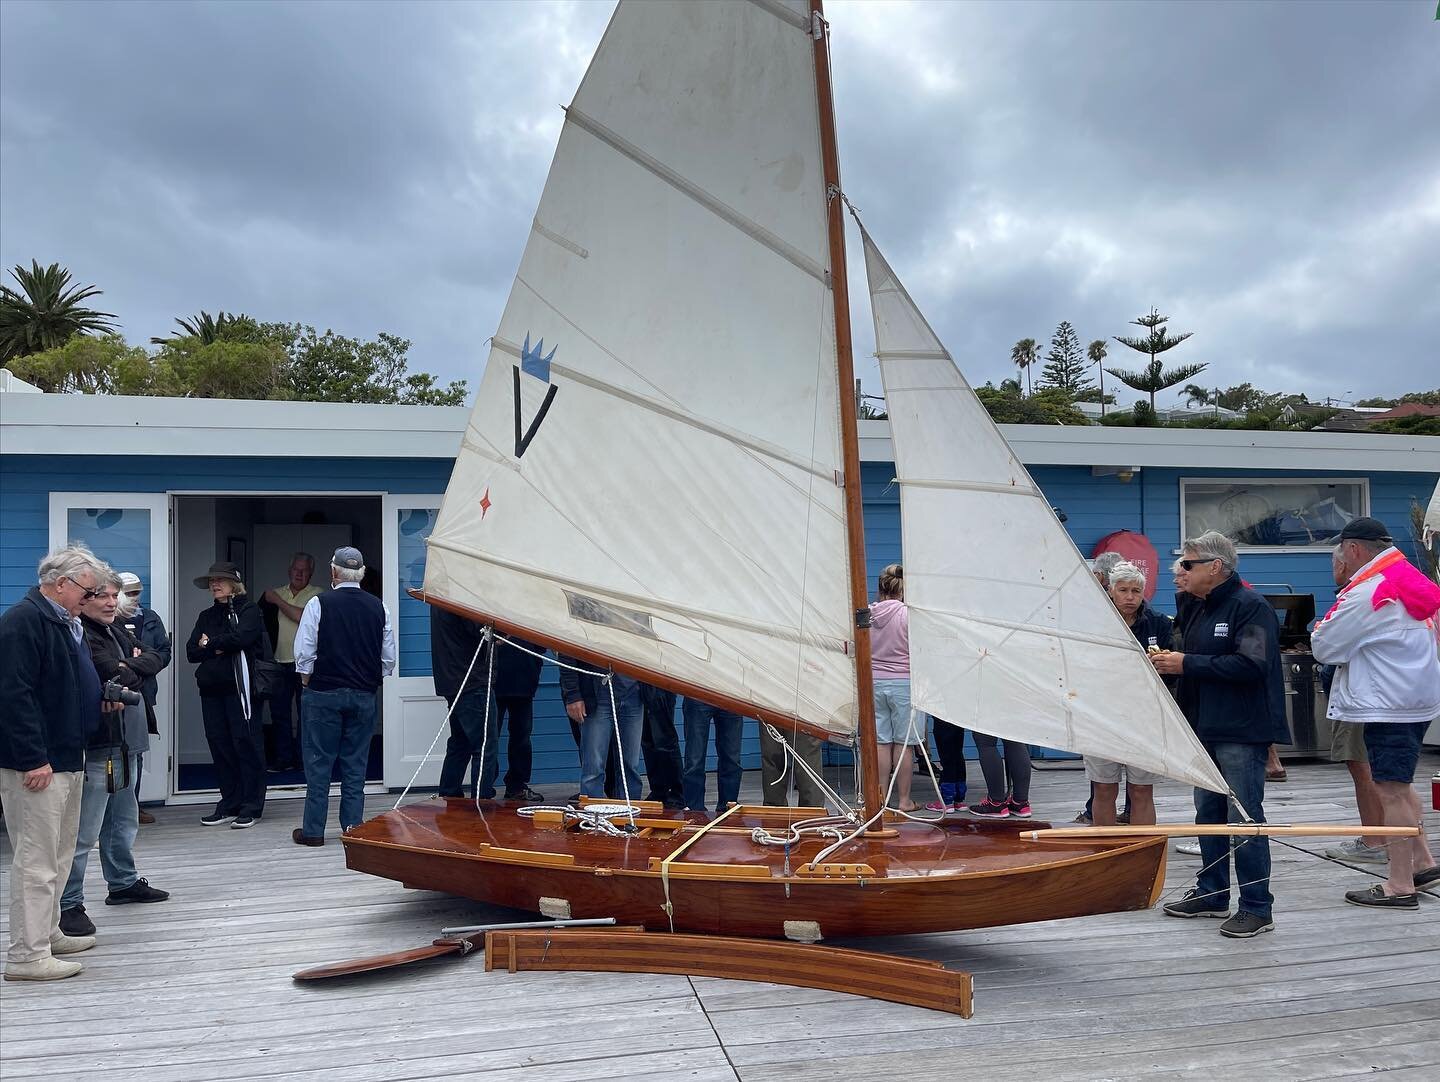 A fantastic 90th Anniversary of the VJ at Vaucluse Yacht Club today! Thanks to everyone who came along and helped out, especially those that brought along boats to the event! 
Also a special thanks to @field_to_fork and @notwasted__ for helping out w